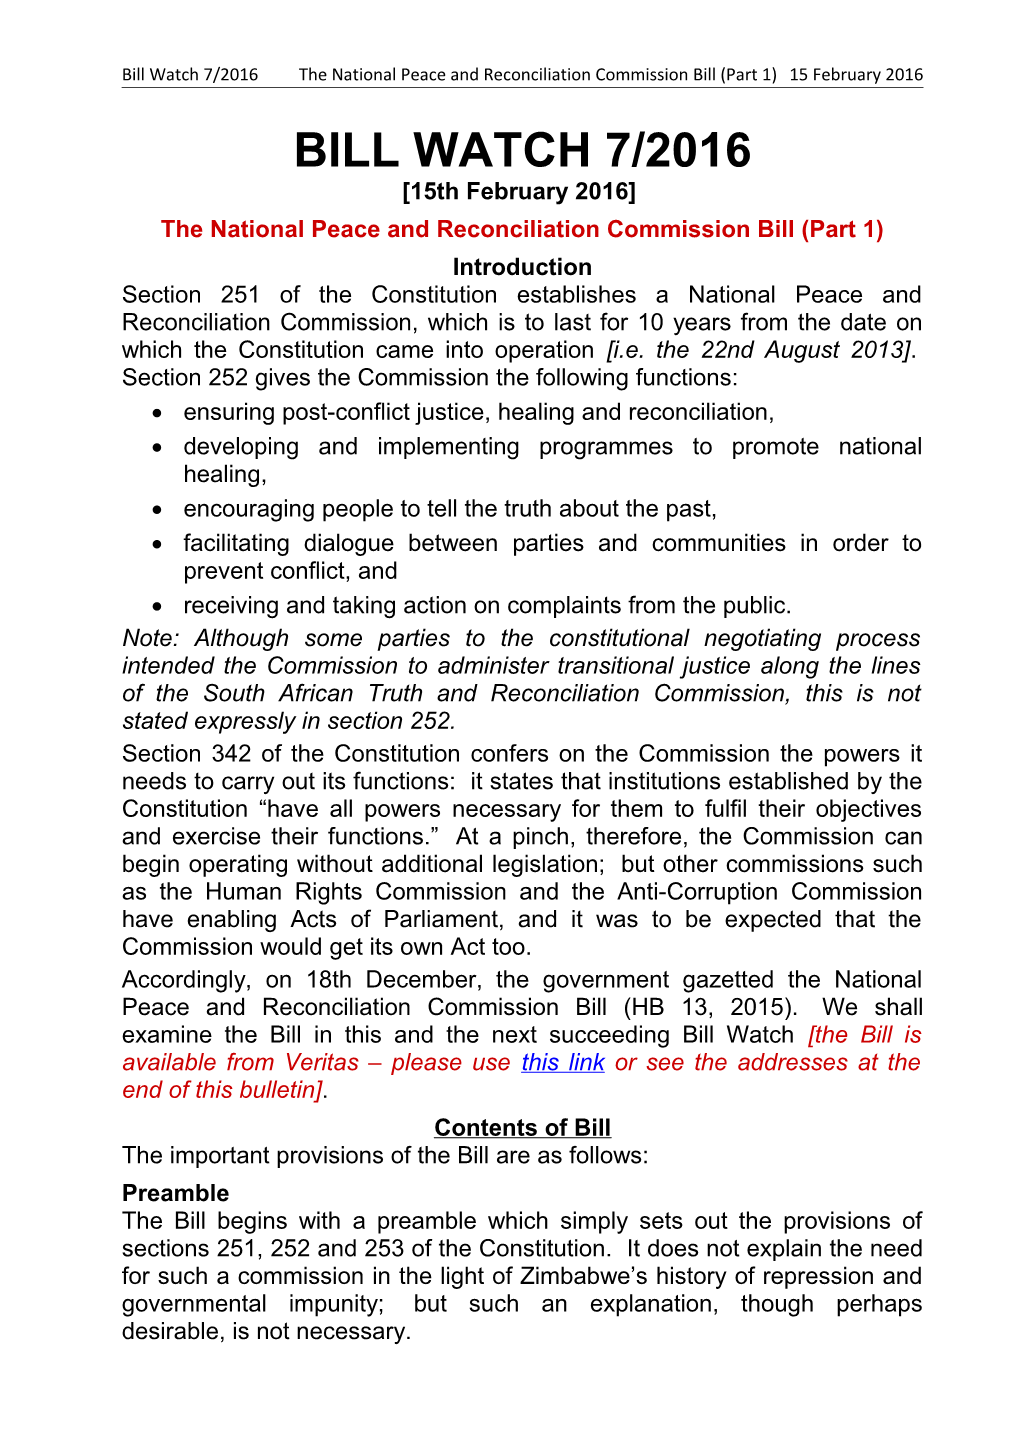 The National Peace and Reconciliation Commission Bill (Part 1)